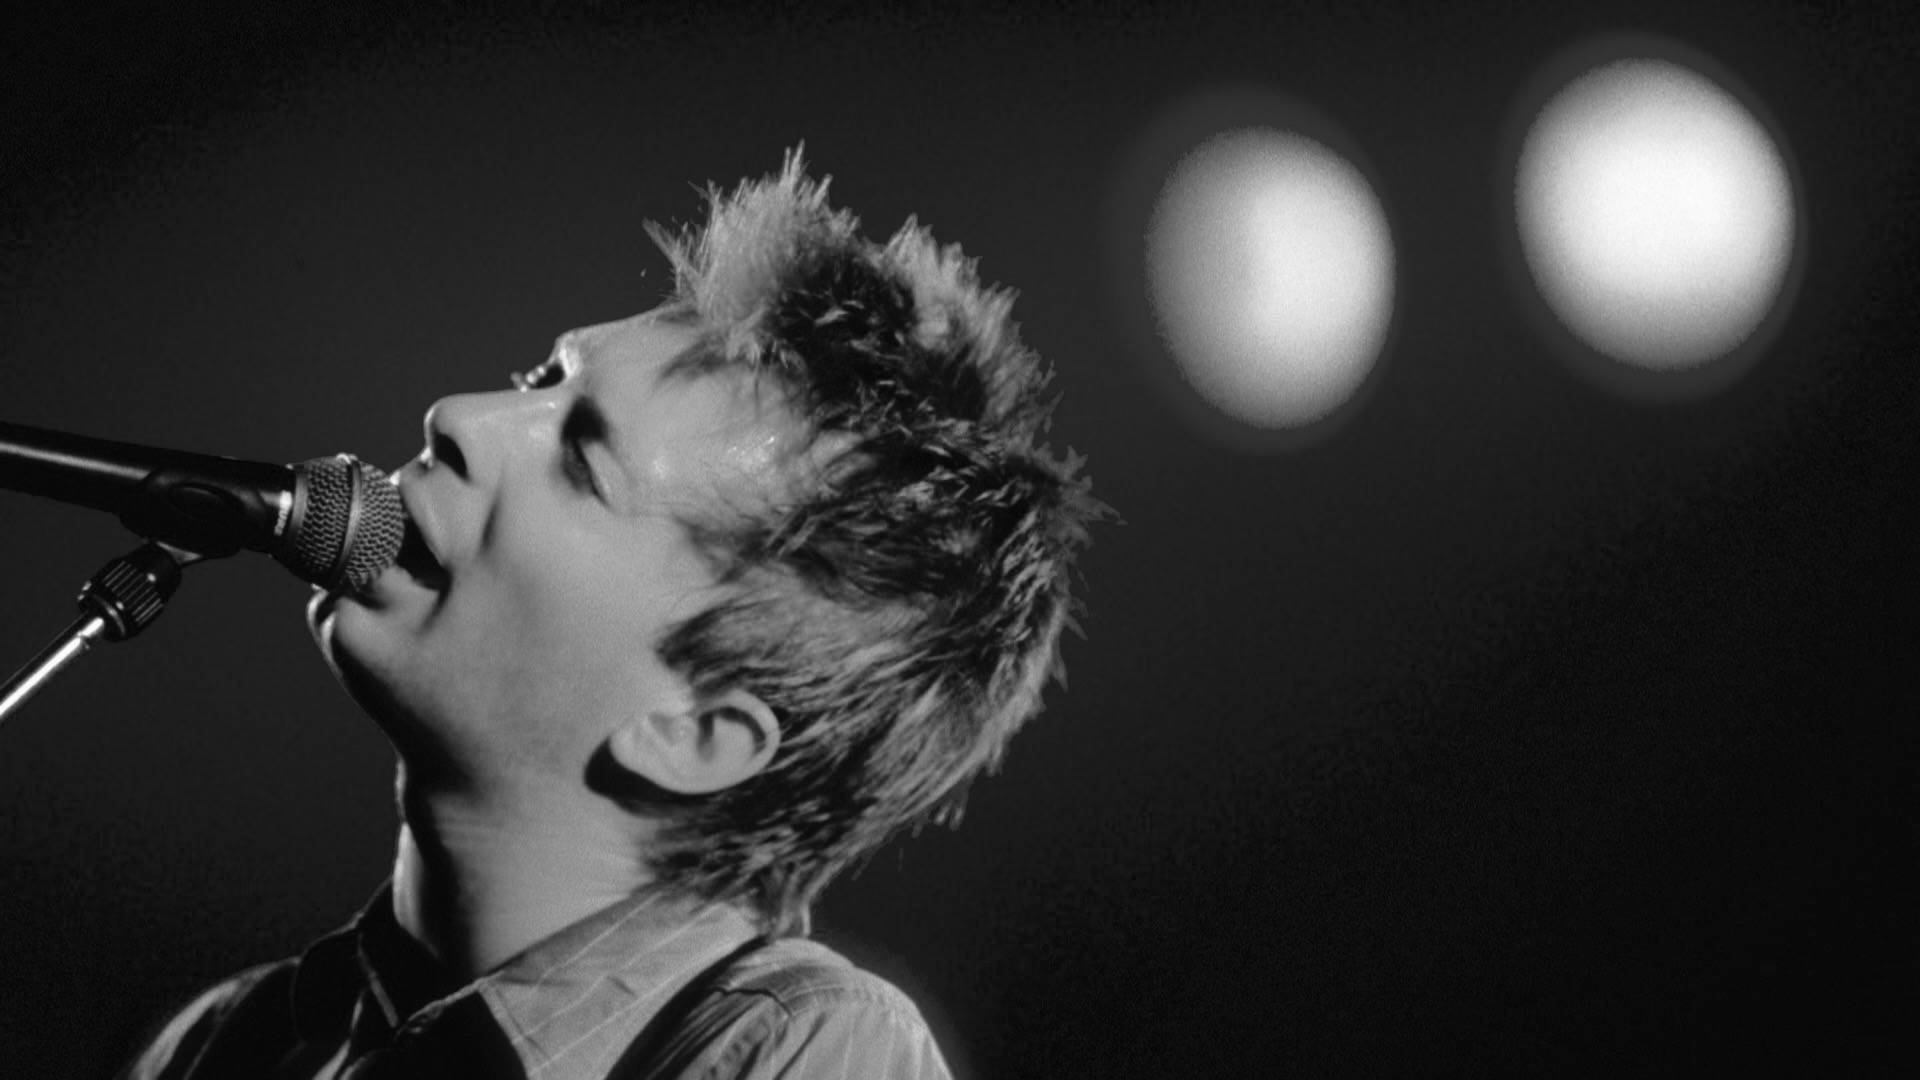 Thom Yorke singing into the microphone on stage in 1995